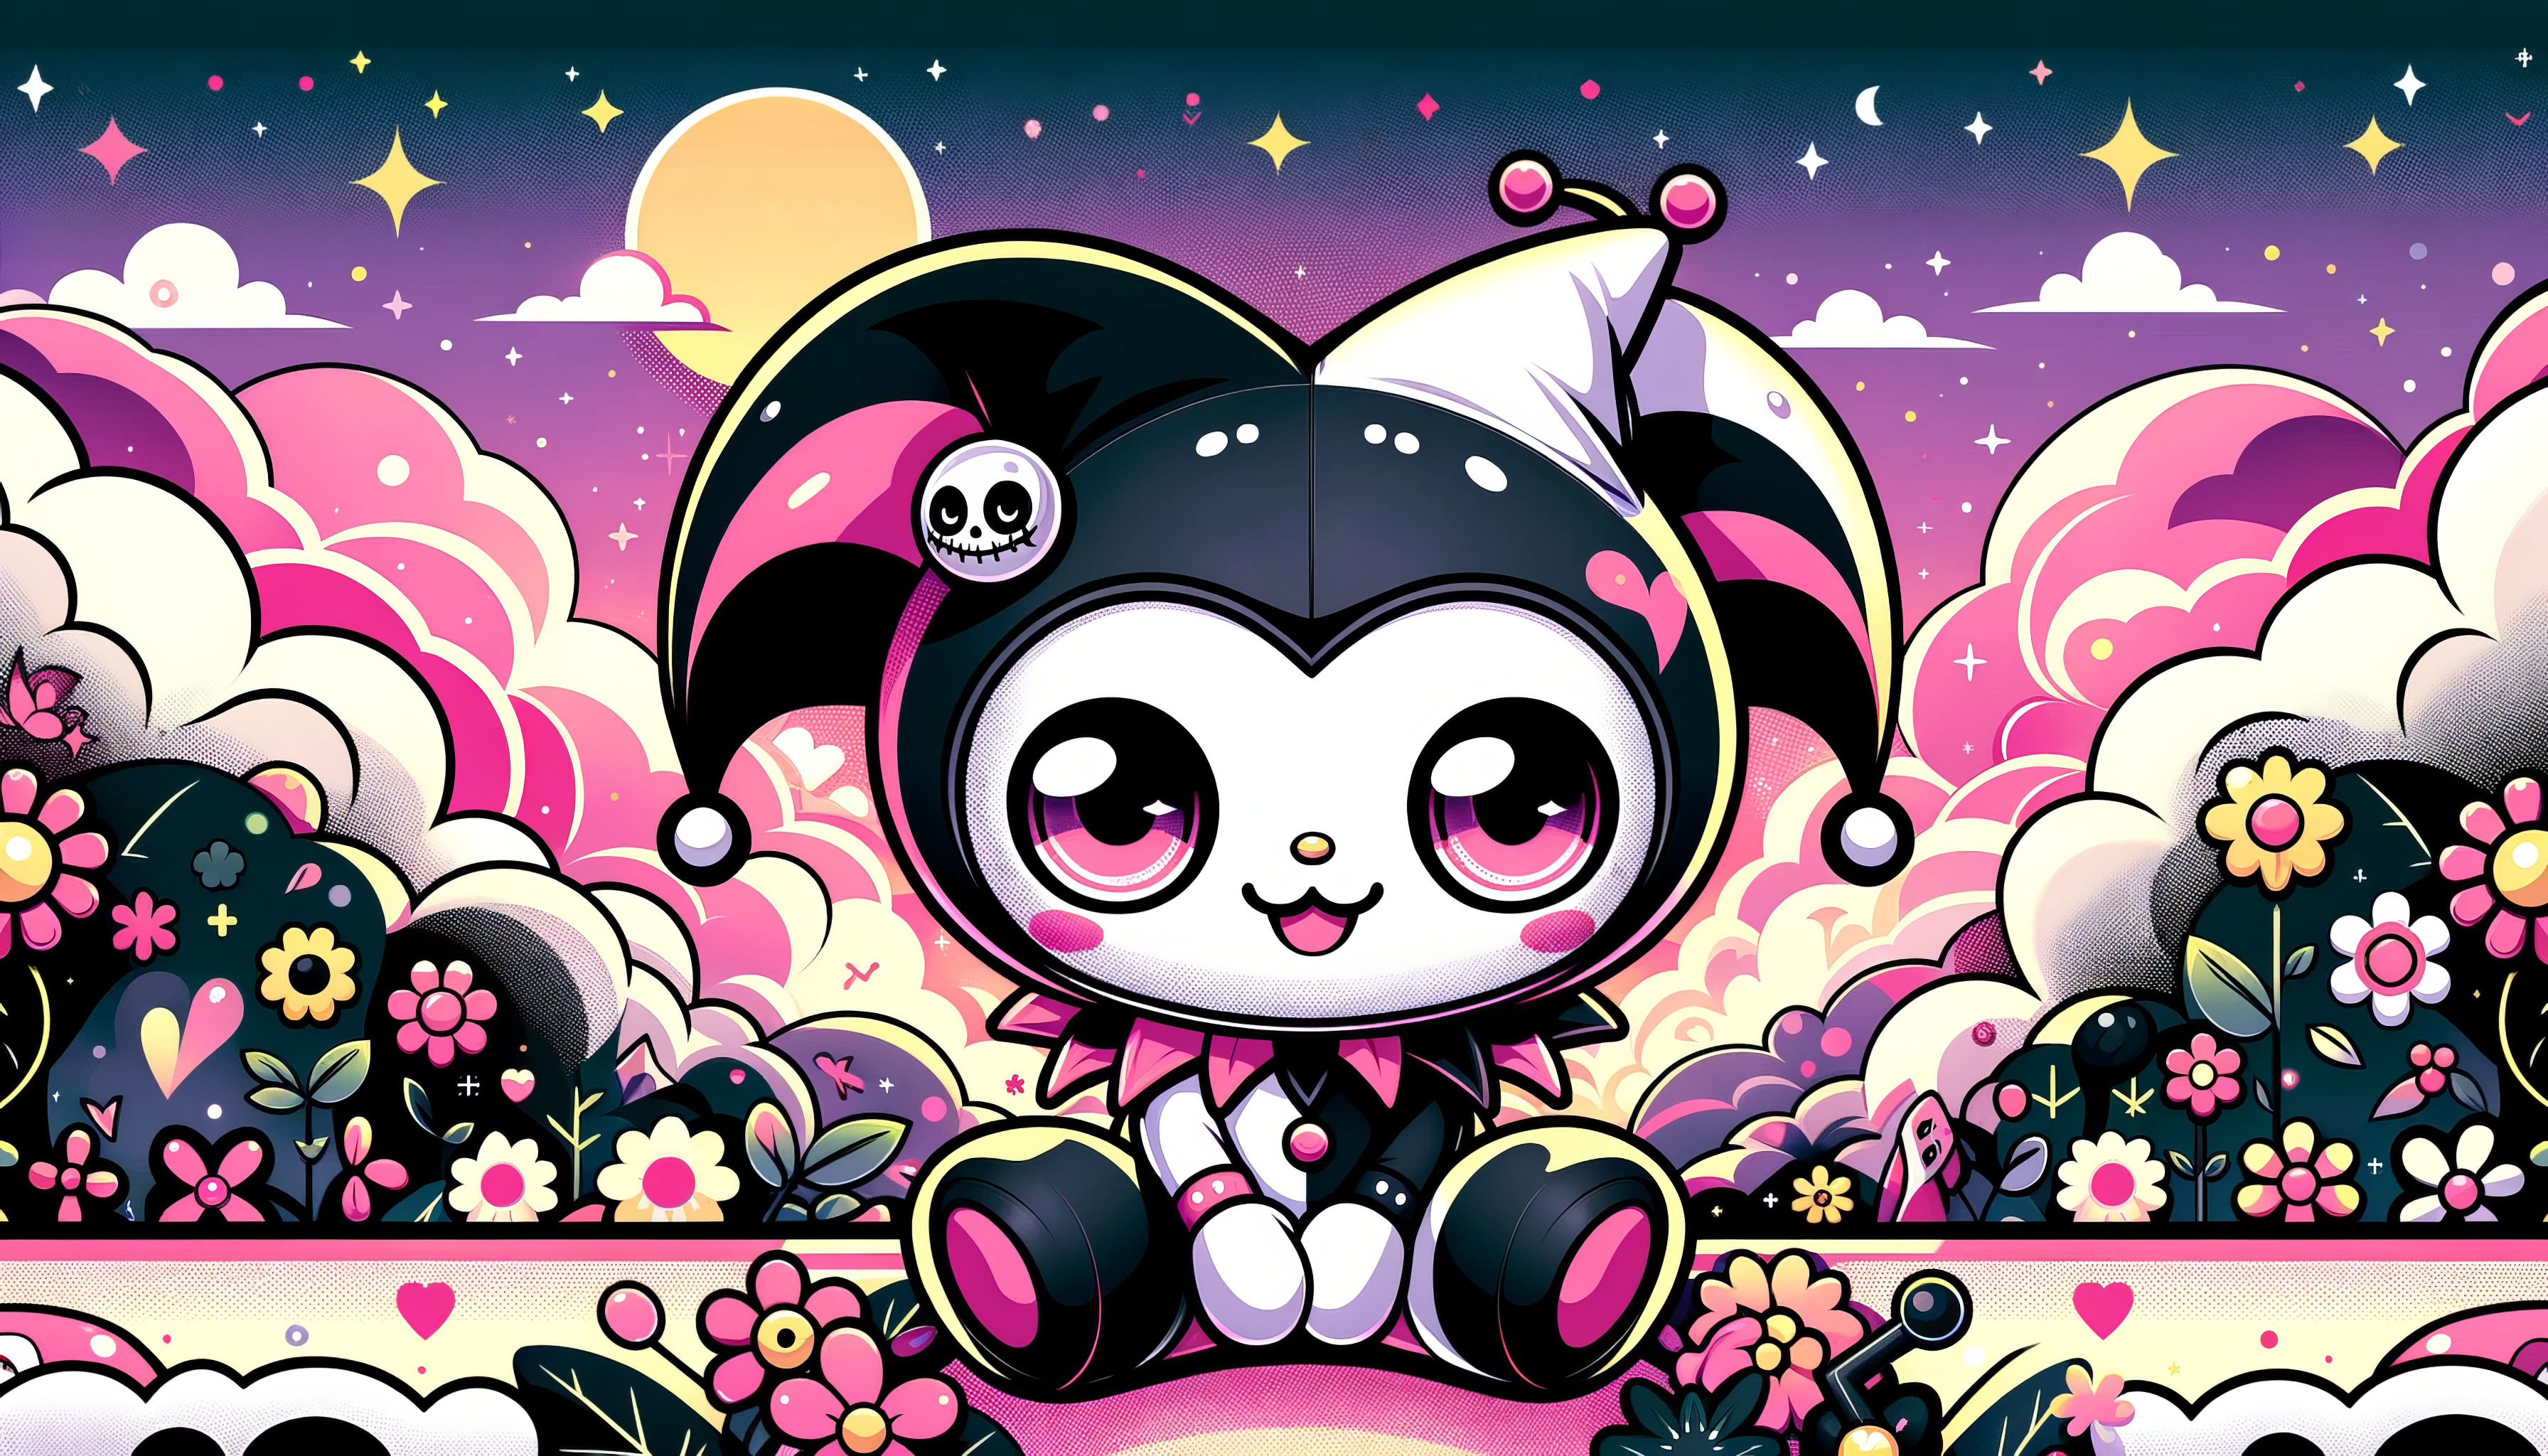 HD desktop wallpaper featuring Kuromi from Hello Kitty against a colorful, whimsical background with flowers and stars.